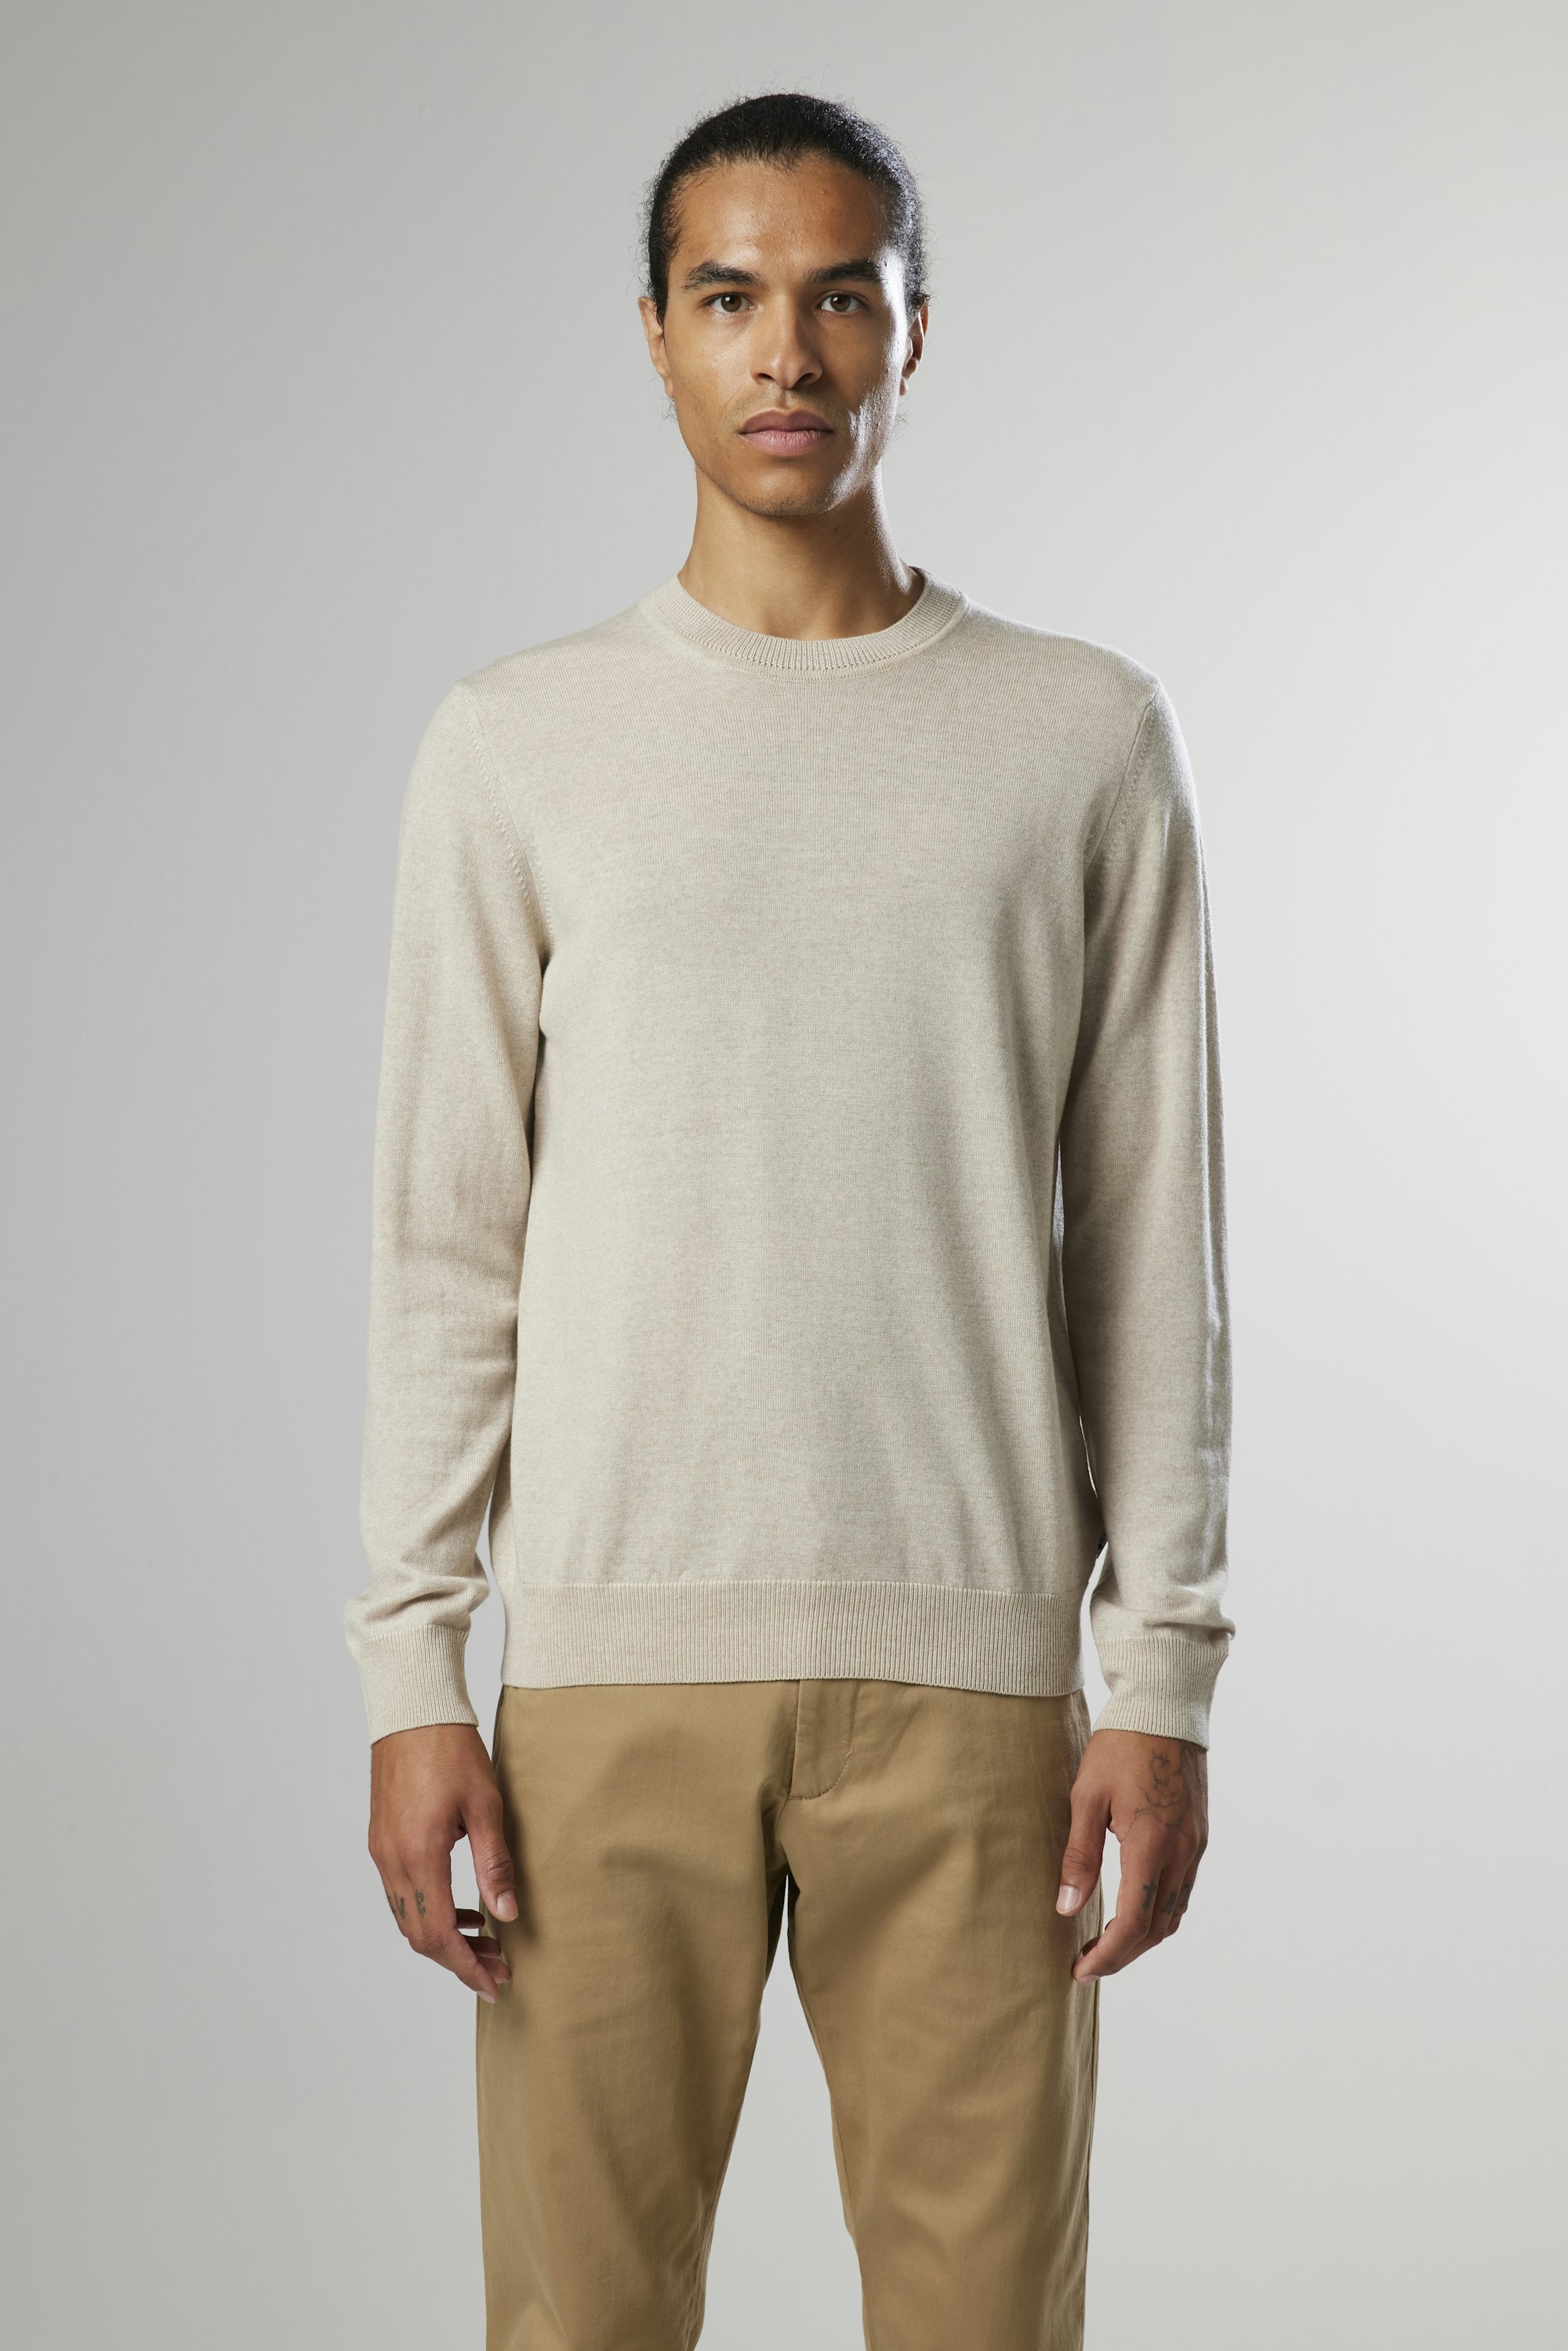 Ted 6328 men's sweater - Brown - Buy online at